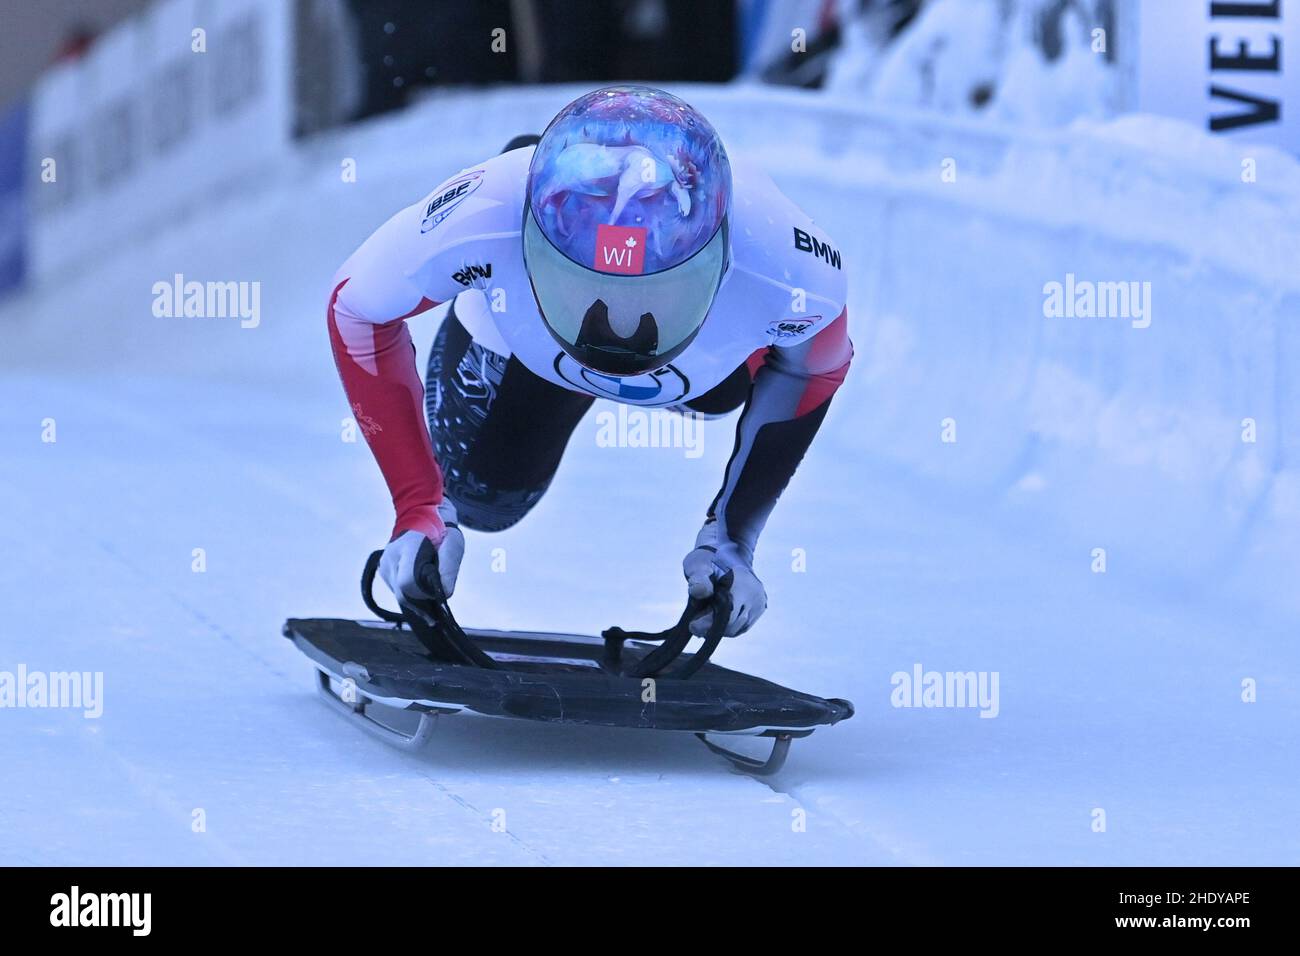 Winterberg, Germany. 07th Jan, 2022. WINTERBERG, GERMANY - JANUARY 7: Mirela Rahneva of Canada competes in the Women's Skeleton during the BMW IBSF Bob & Skeleton Weltcup Women's 21/22 at VELTINS-EisArena on January 7, 2022 in Winterberg, Germany (Photo by Patrick Goosen/Orange Pictures) Credit: Orange Pics BV/Alamy Live News Stock Photo